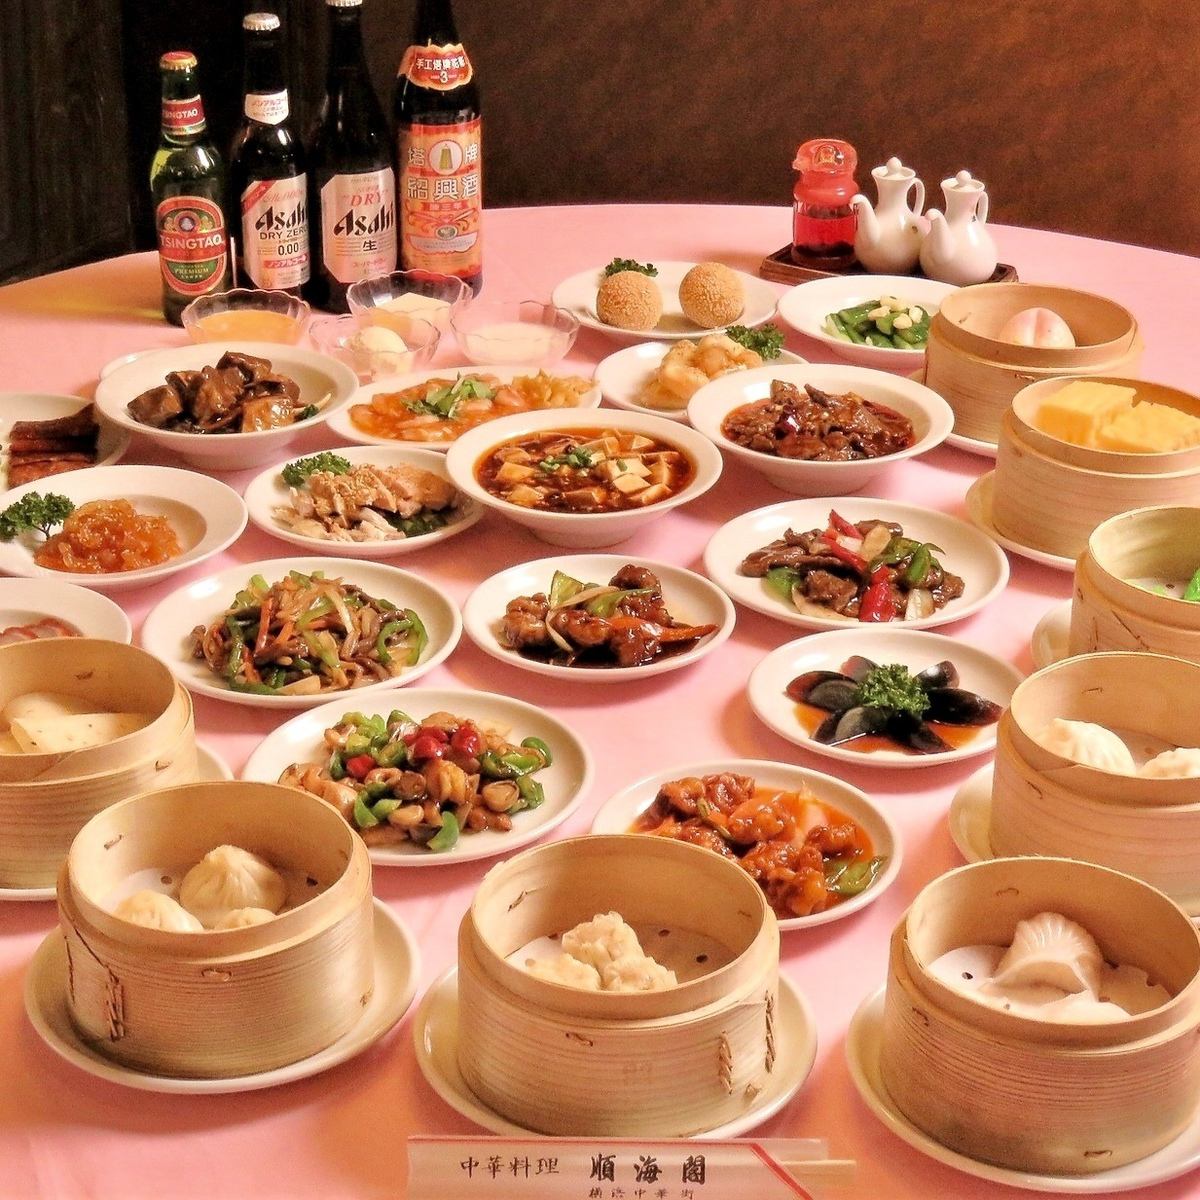 No time limit, order-style all-you-can-eat We offer from 2200 yen on weekdays